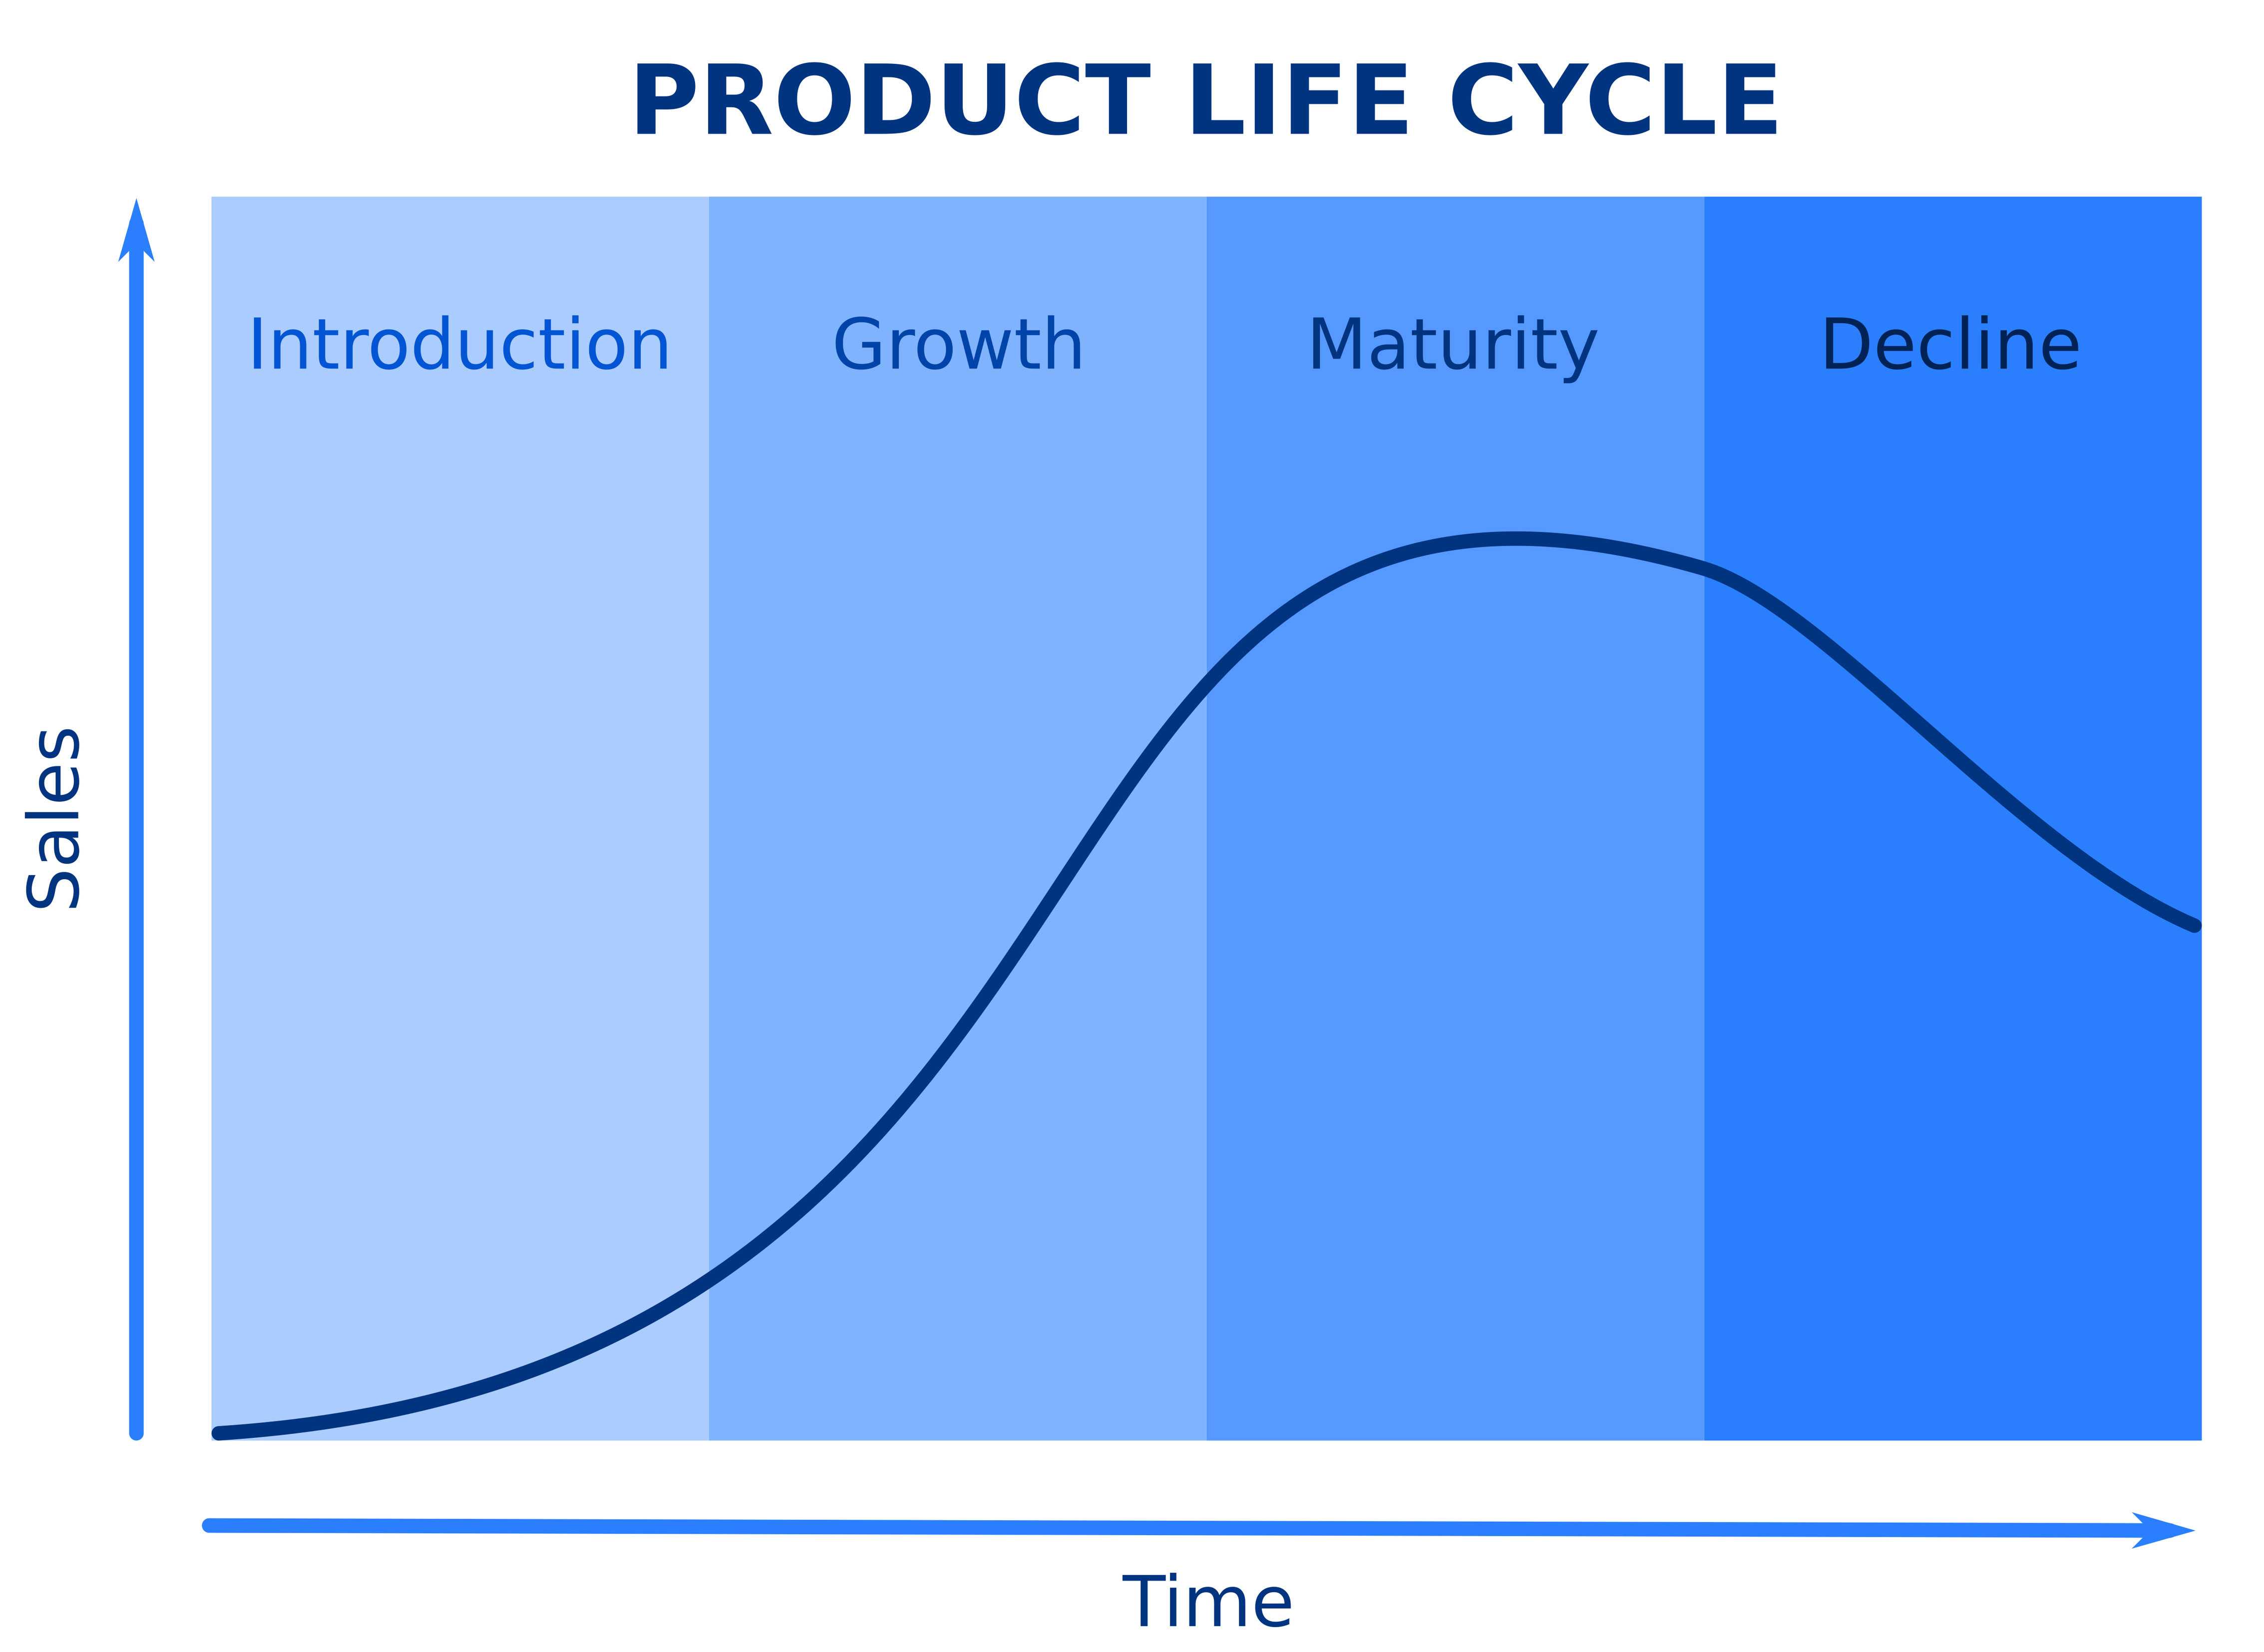 Graph showing product life cycle over time